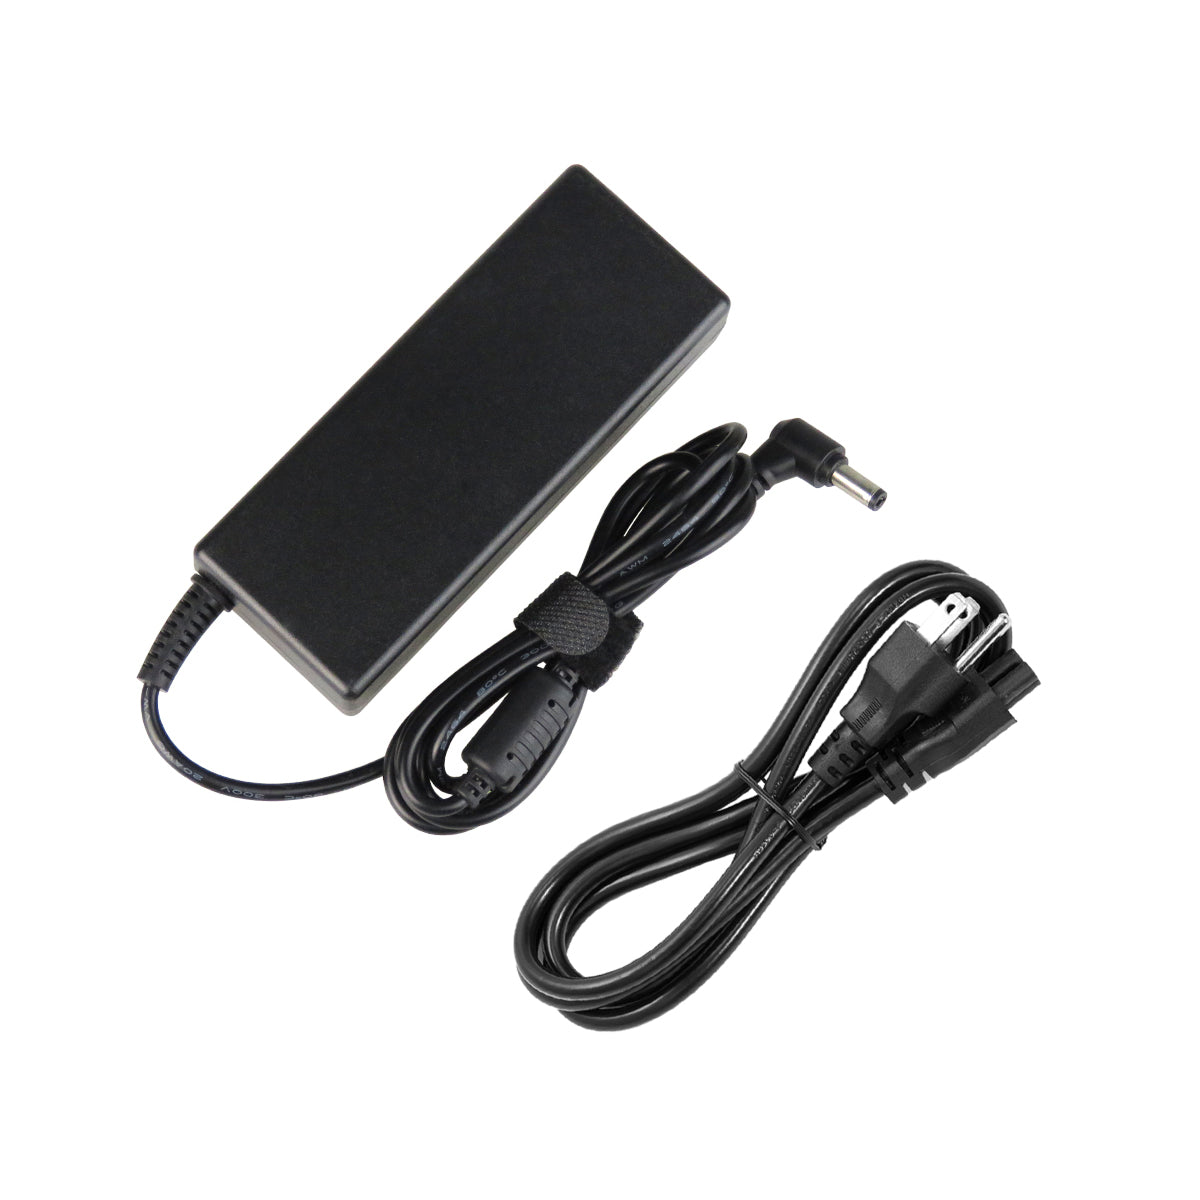 AC Adapter Charger for ASUS G51VX Notebook.